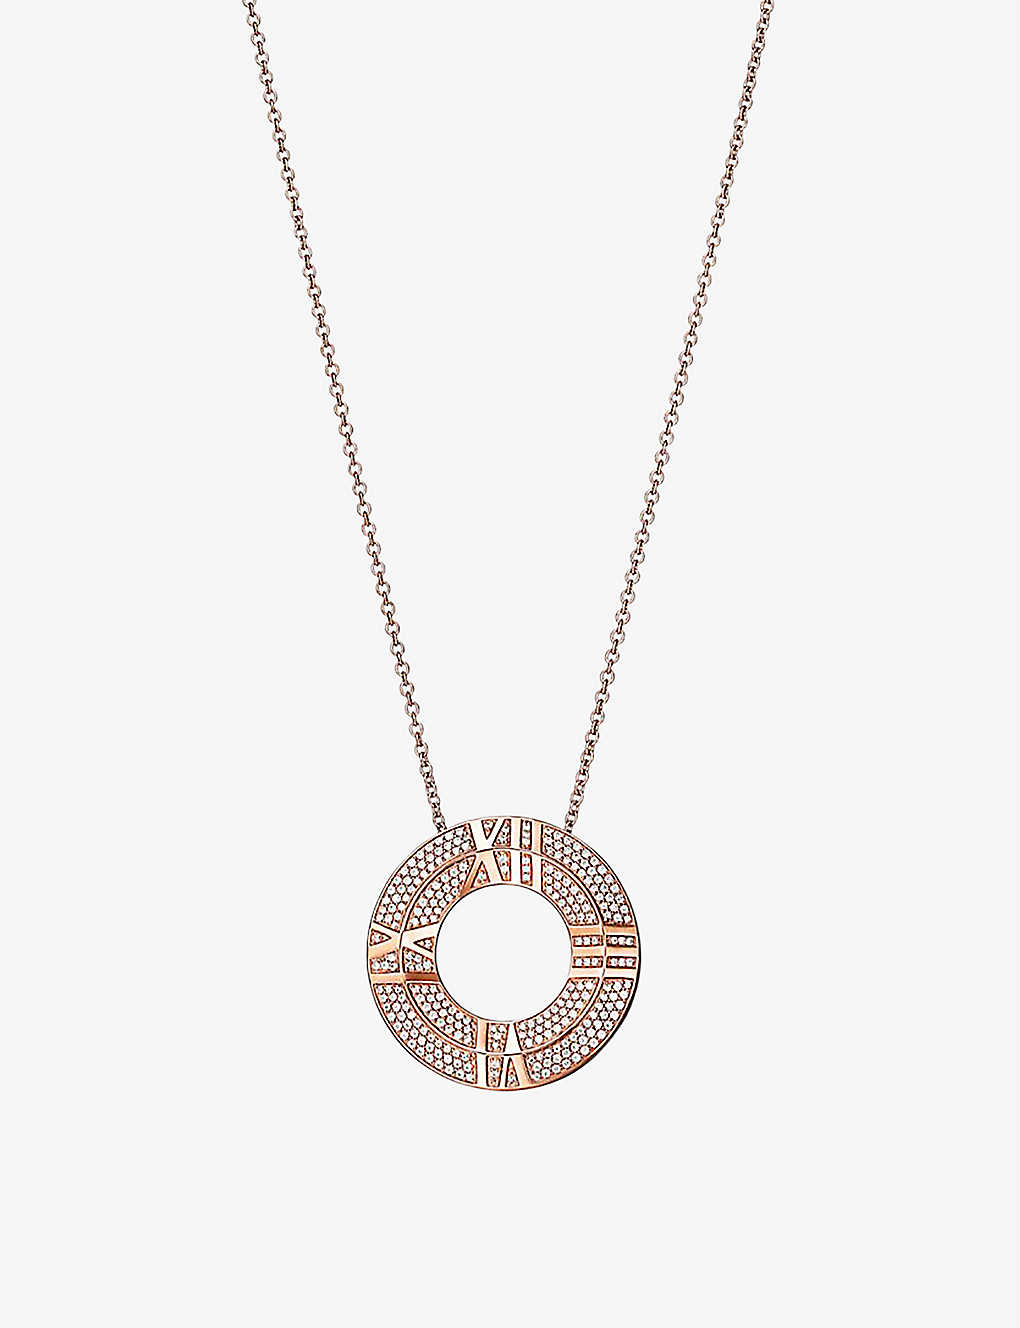 Tiffany & Co Womens Rose Gold Atlas X 18ct Rose-gold And 0.57 Diamond Pendant Necklace